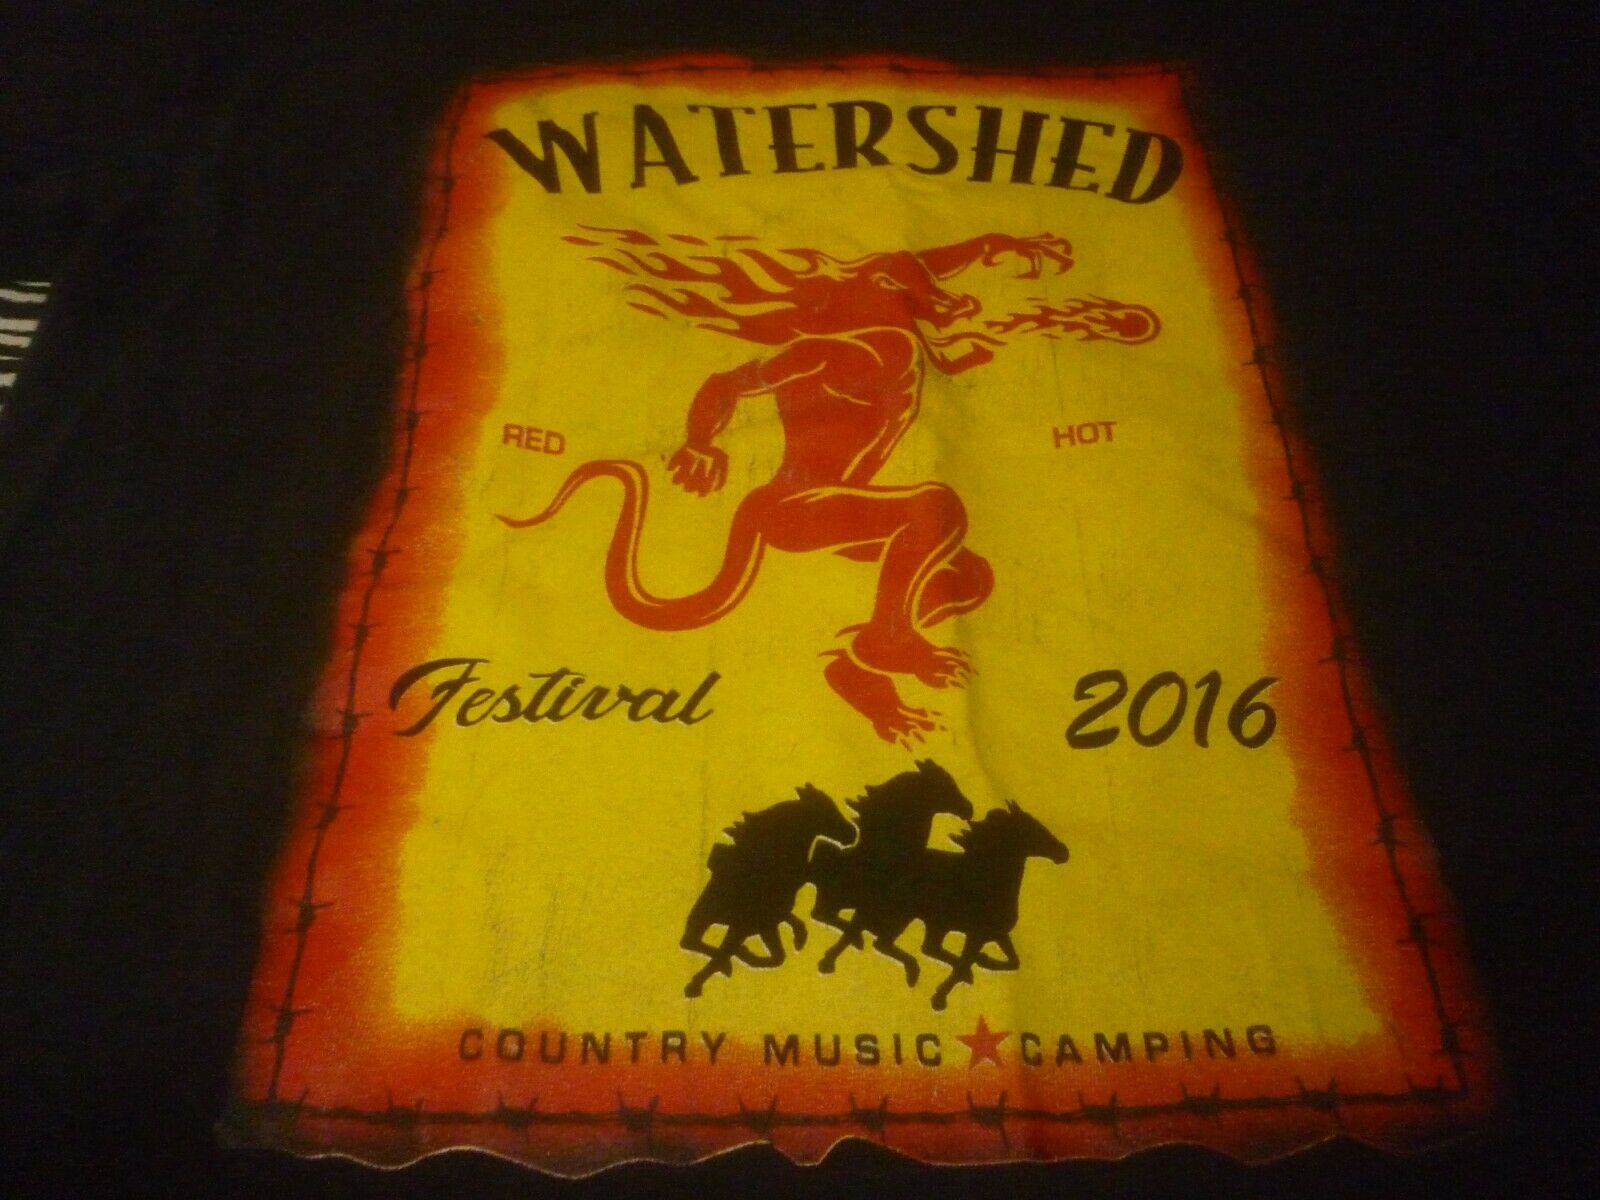 Watershed Festival 2016 Shirt - Used Size L Missing Tag - Good Condition!!!